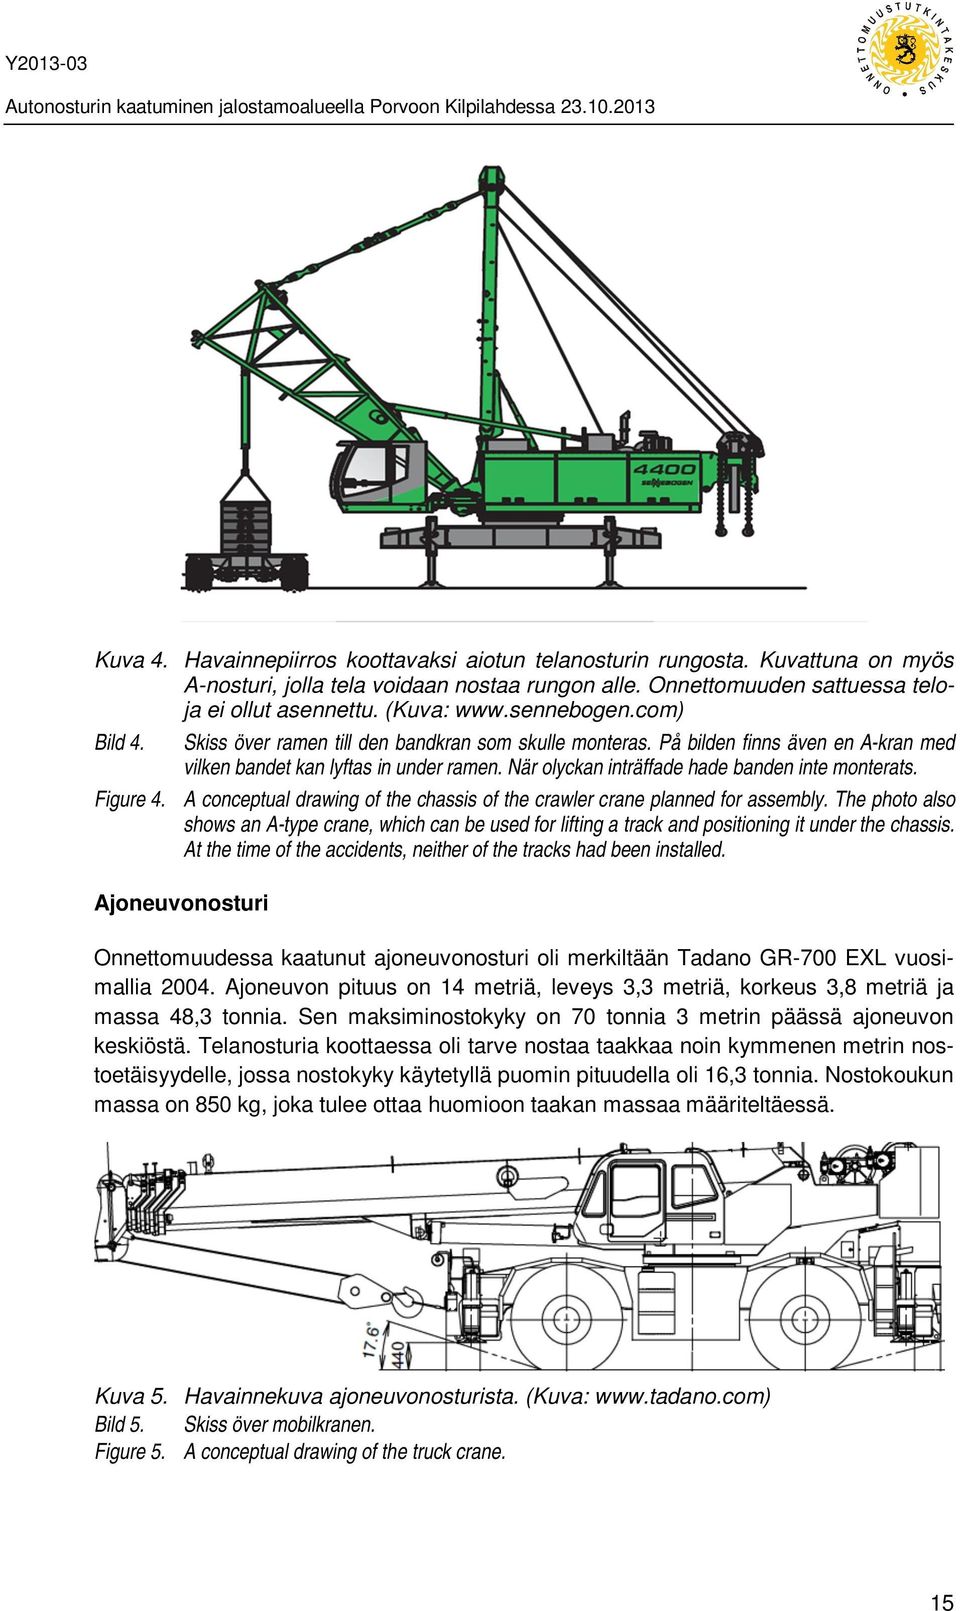 När olyckan inträffade hade banden inte monterats. Figure 4. A conceptual drawing of the chassis of the crawler crane planned for assembly.